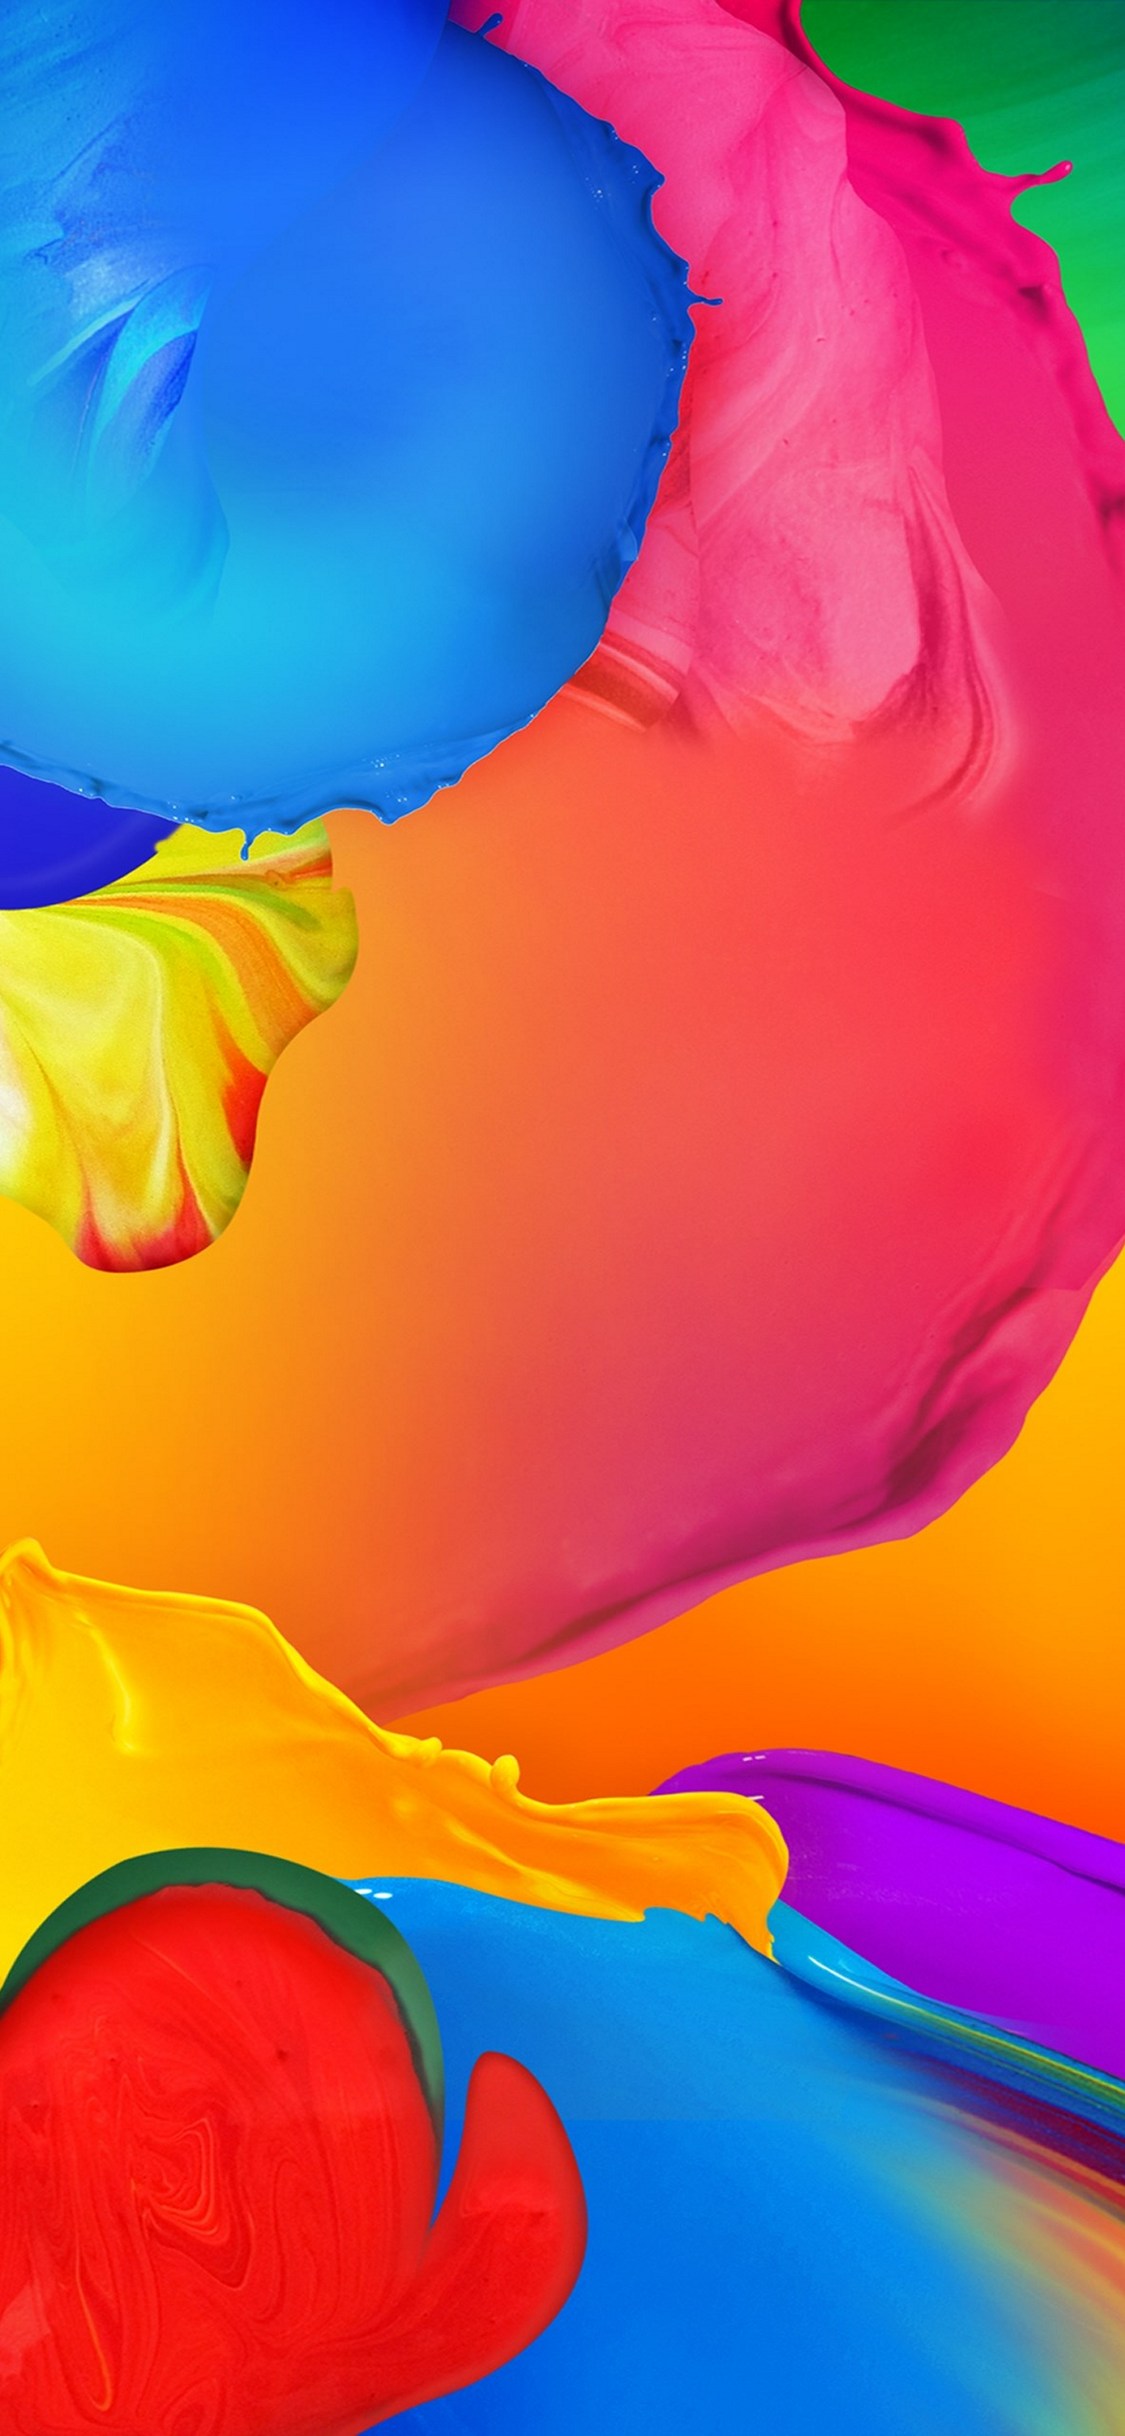 Samsung A50 Wallpaper Hd 1080P Download - Check out the samsung galaxy